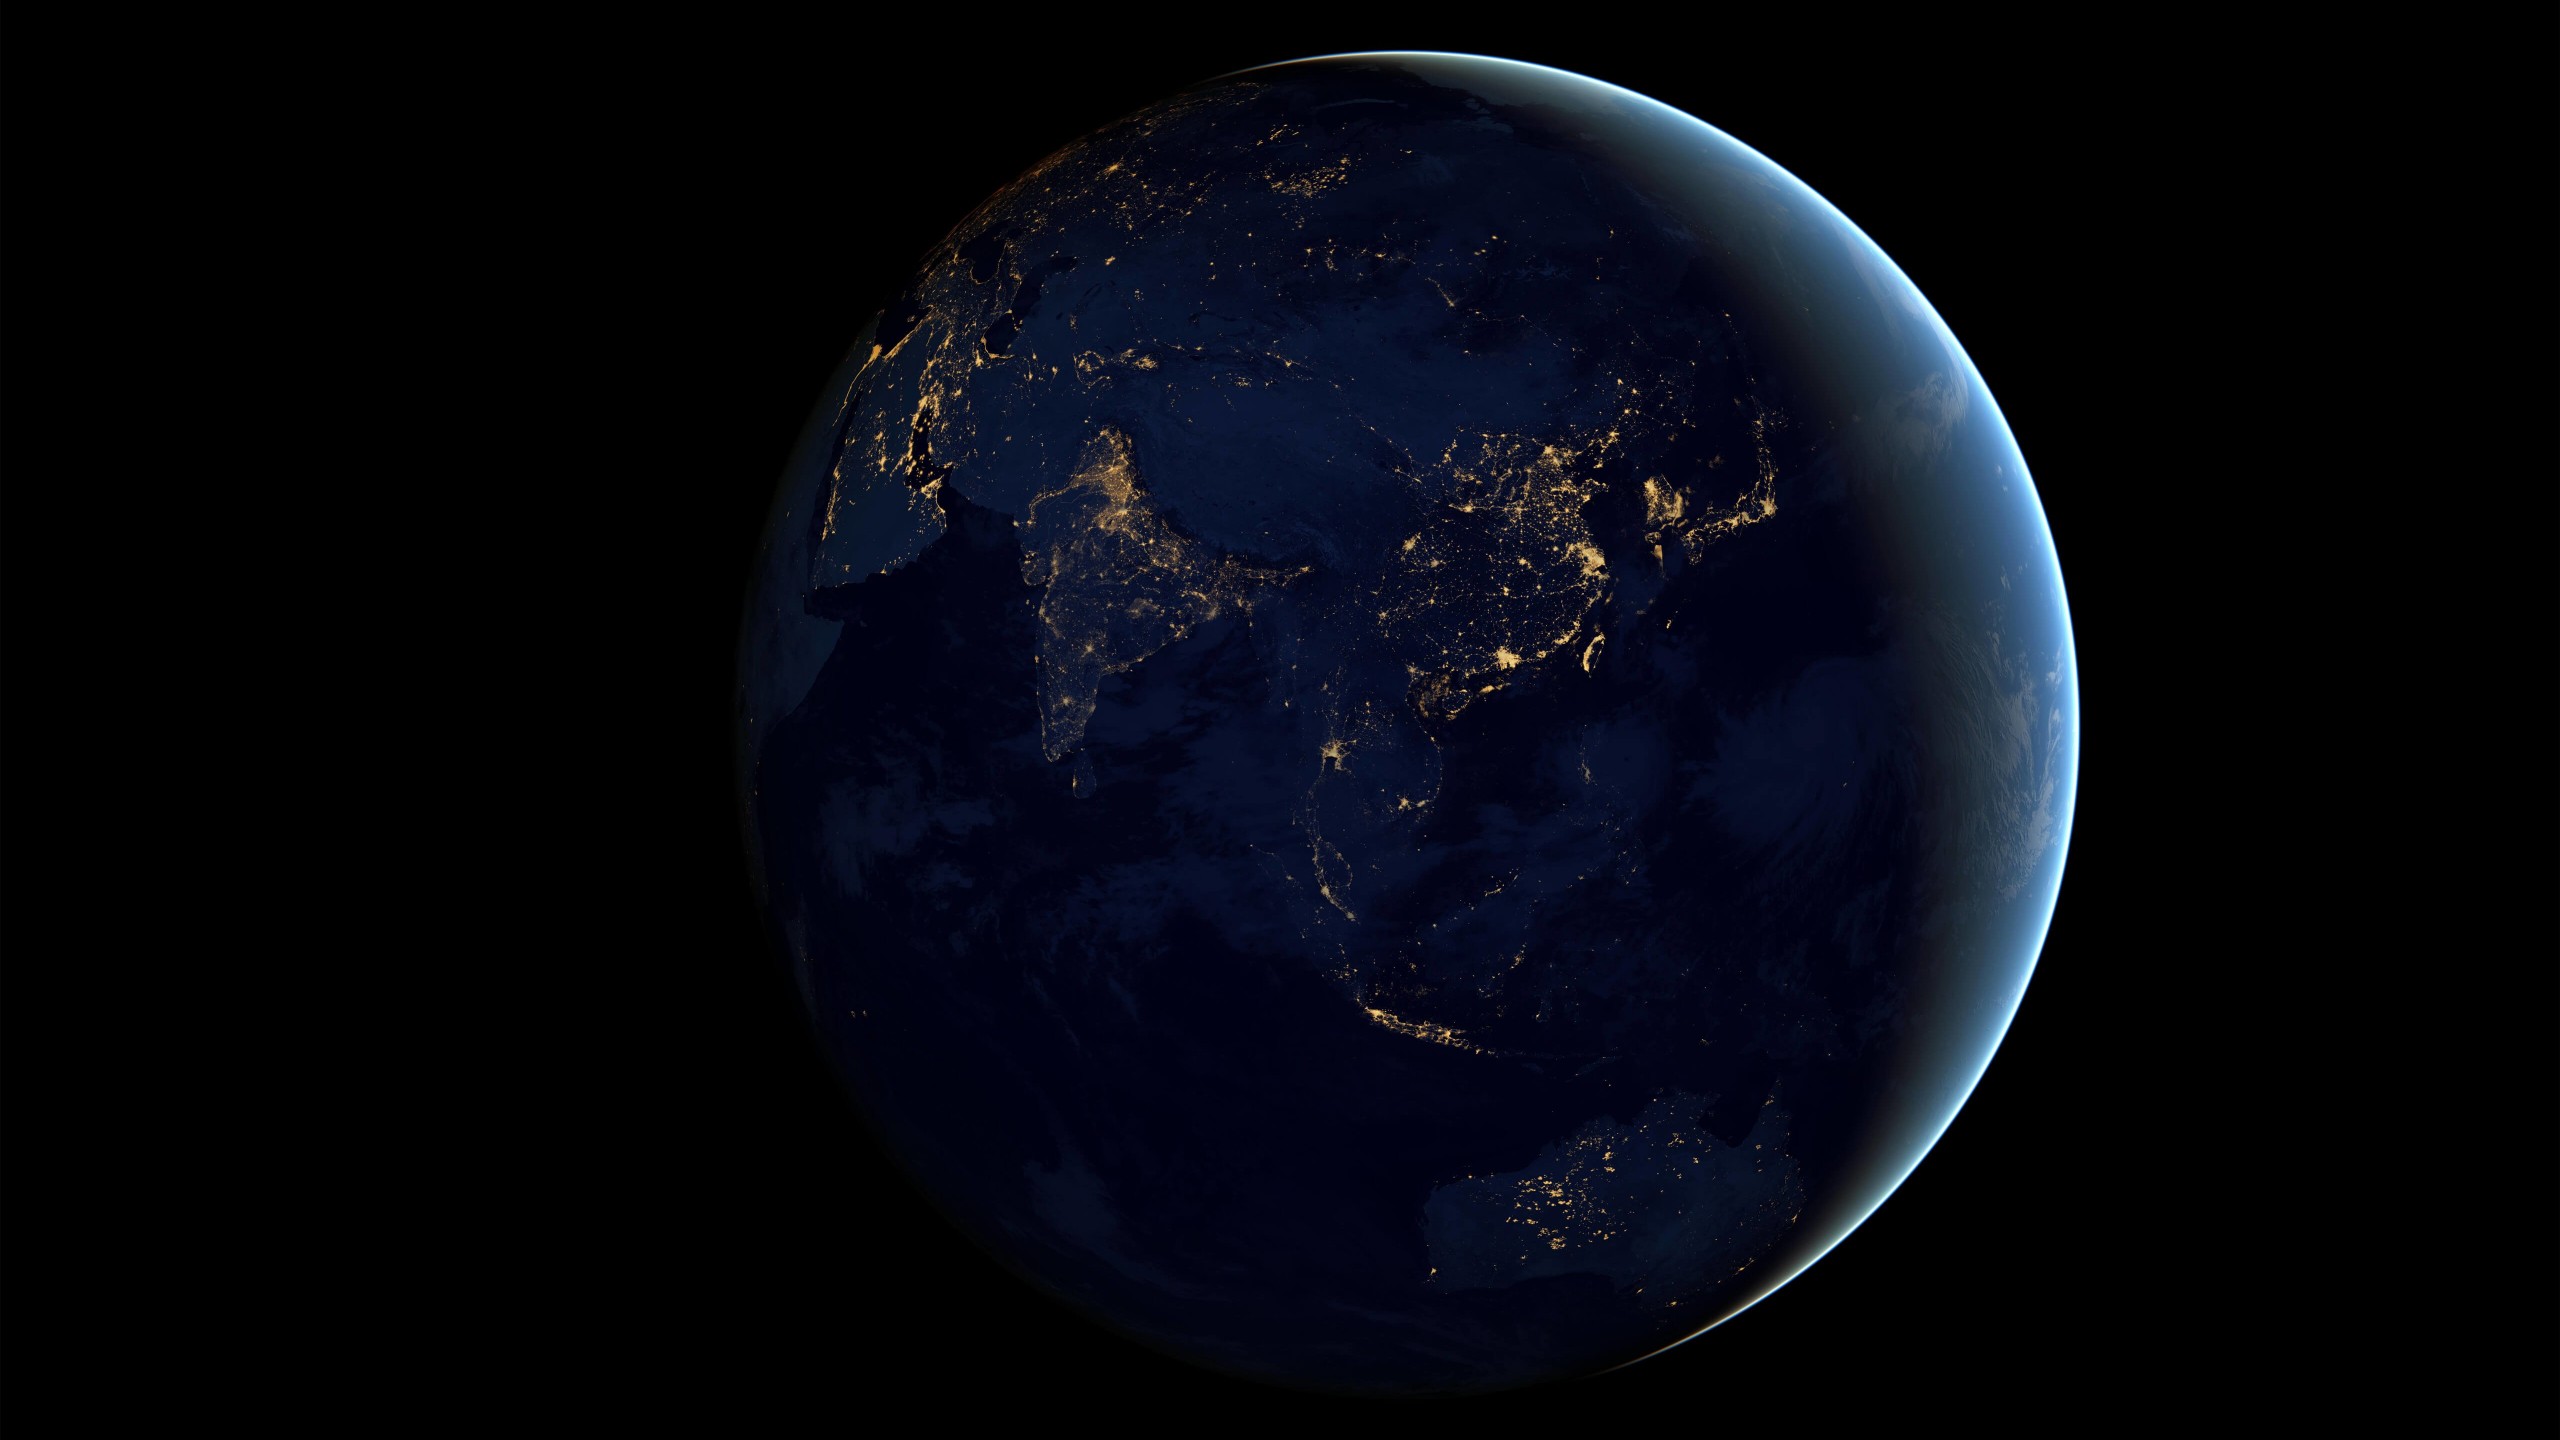 Earth At Night Seen From Space Wallpaper for Desktop 2560x1440